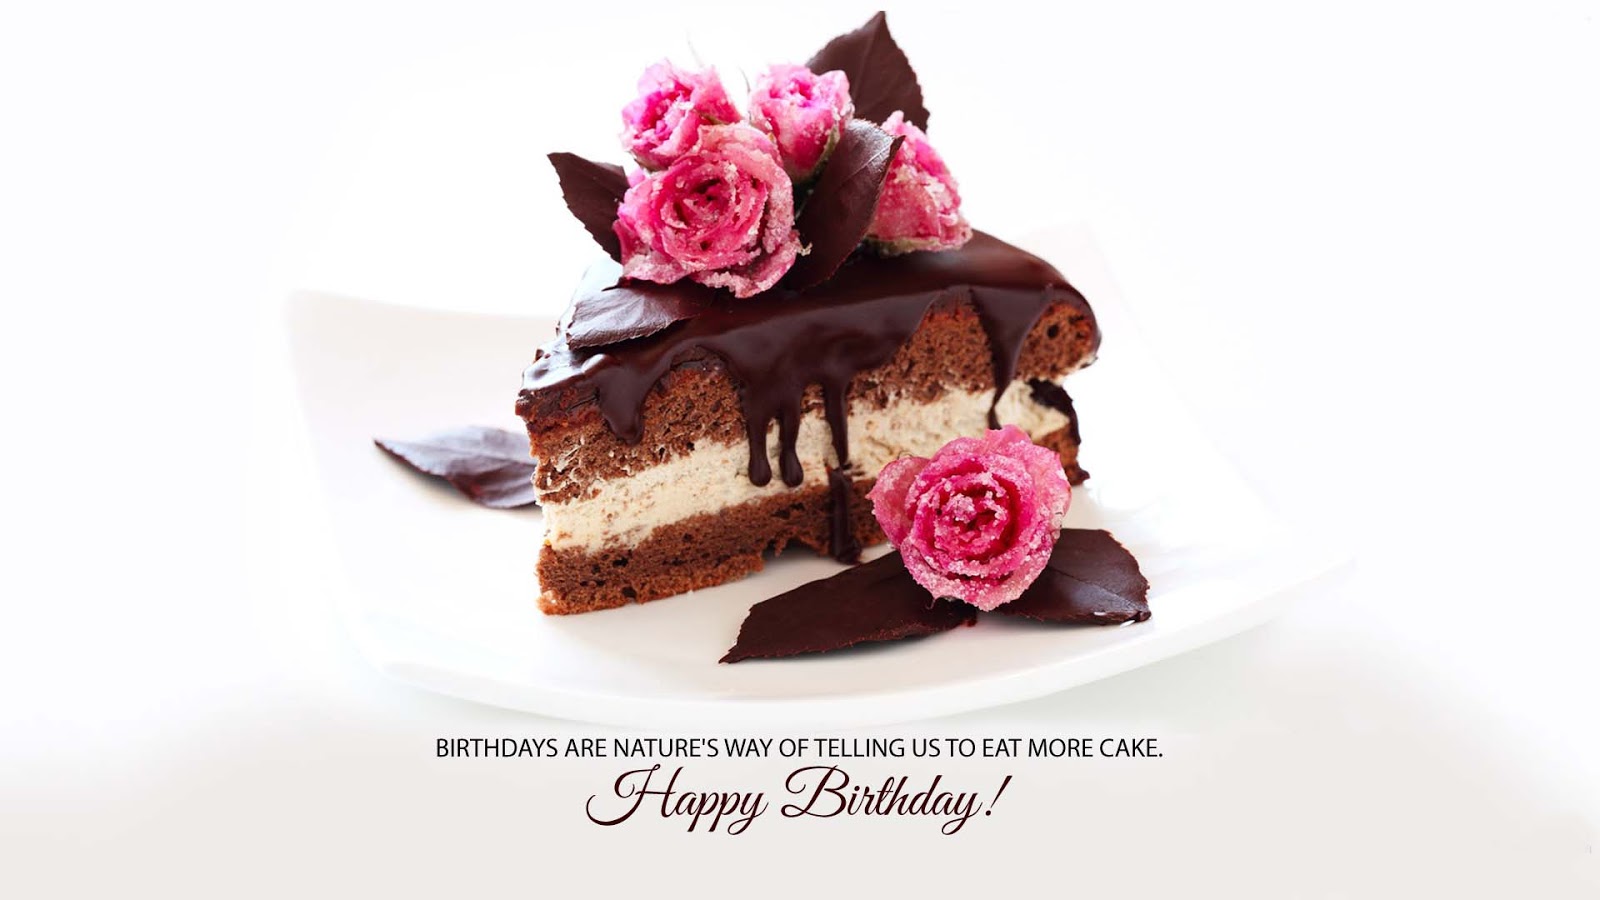 Happy Birth Day Cake Made By Rose - Latest Birthday Cake Wallpaper Hd , HD Wallpaper & Backgrounds